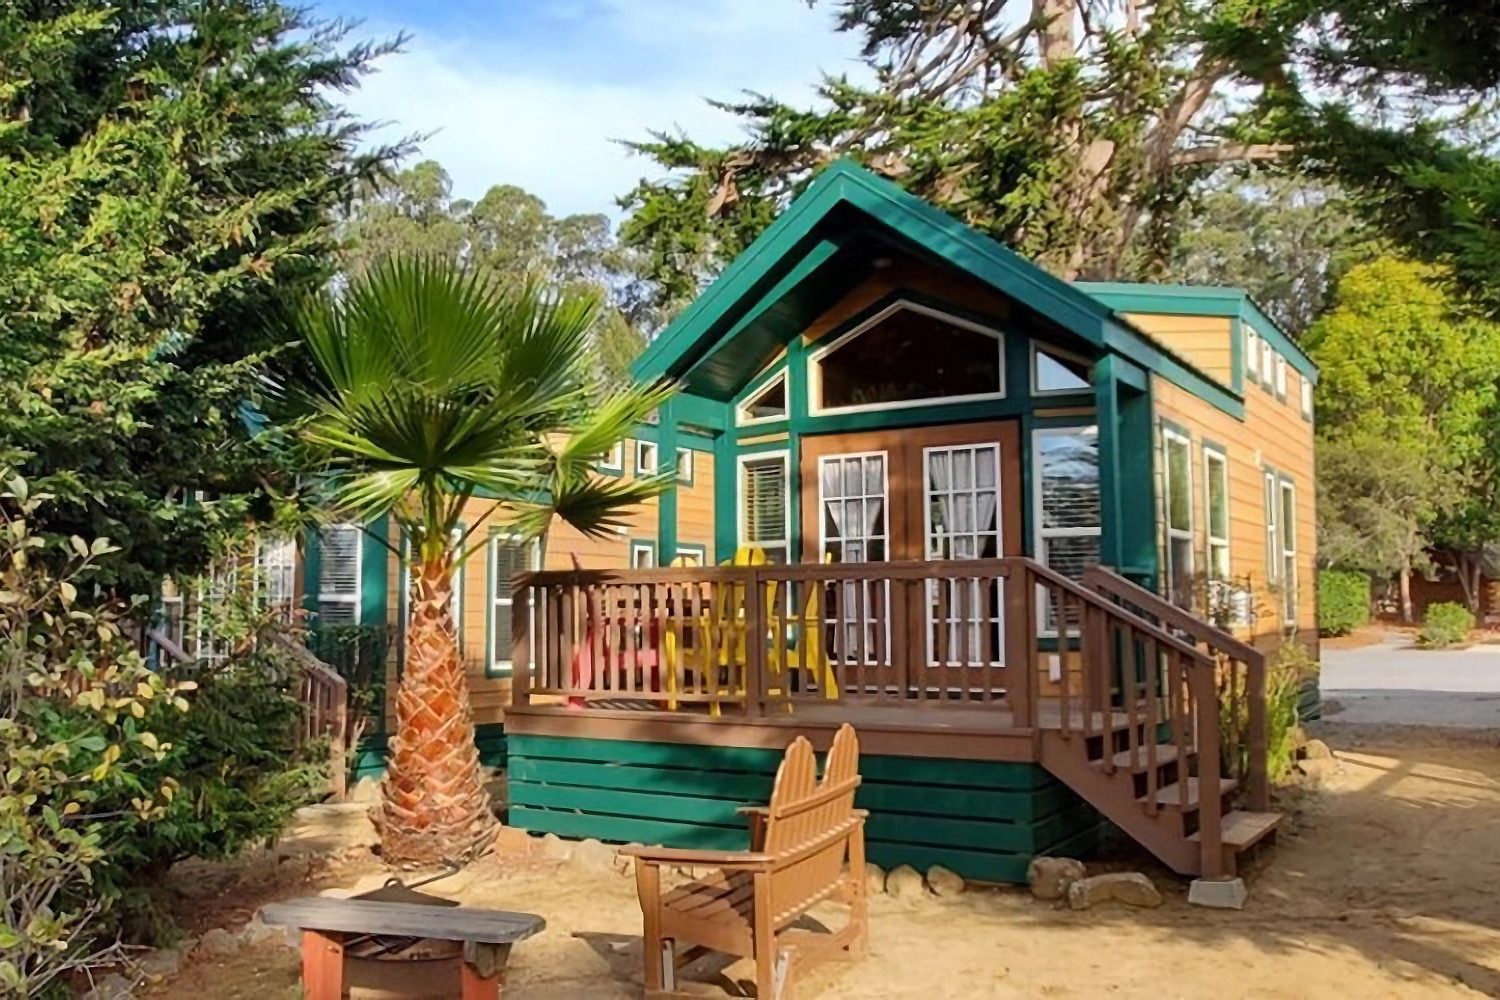 <p>This is not your grandpa's KOA. Many of the classic KOA campgrounds across the United States are getting glam makeovers, including <a href="https://koa.com/campgrounds/santa-cruz/?gad=1&gclid=Cj0KCQjw7PCjBhDwARIsANo7CgmgLimDawEln-N2l_LRQDzYygIgVN1phVVSZRTGrJqwIa_CTV66hXwaAjkNEALw_wcB&gclsrc=aw.ds" rel="noopener noreferrer">this one</a> on California's central coast in Watsonville. It's perfect for <a href="https://www.rd.com/article/camping-with-dogs/" rel="noopener noreferrer">camping with pets</a>, and it's still possible to rough it in a regular tent or pull up in an RV, should you want to. But since glamping means you don't have to sleep on uneven ground, you can rent a camping cabin and walk from the private patio through French doors to snooze in a four-poster bed with real sheets.</p> <p>The new camping cabins also feature a Keurig coffee bar and refrigerator. Not on a romantic rendezvous for two? Deluxe cabins and Airstreams sleep four or six and have cable and bathrooms inside. It's a mile from Manresa State Beach, but the pool, a train, outdoor movies, jumping pillow, tie-dyed T-shirt making and palm-tree climbing give families multiple reasons to kick it within KOA walls.</p> <p class="listicle-page__cta-button-shop"><a class="shop-btn" href="https://koa.com/campgrounds/santa-cruz/?gad=1&gclid=Cj0KCQjw7PCjBhDwARIsANo7CgmgLimDawEln-N2l_LRQDzYygIgVN1phVVSZRTGrJqwIa_CTV66hXwaAjkNEALw_wcB&gclsrc=aw.ds">Book Now</a></p>